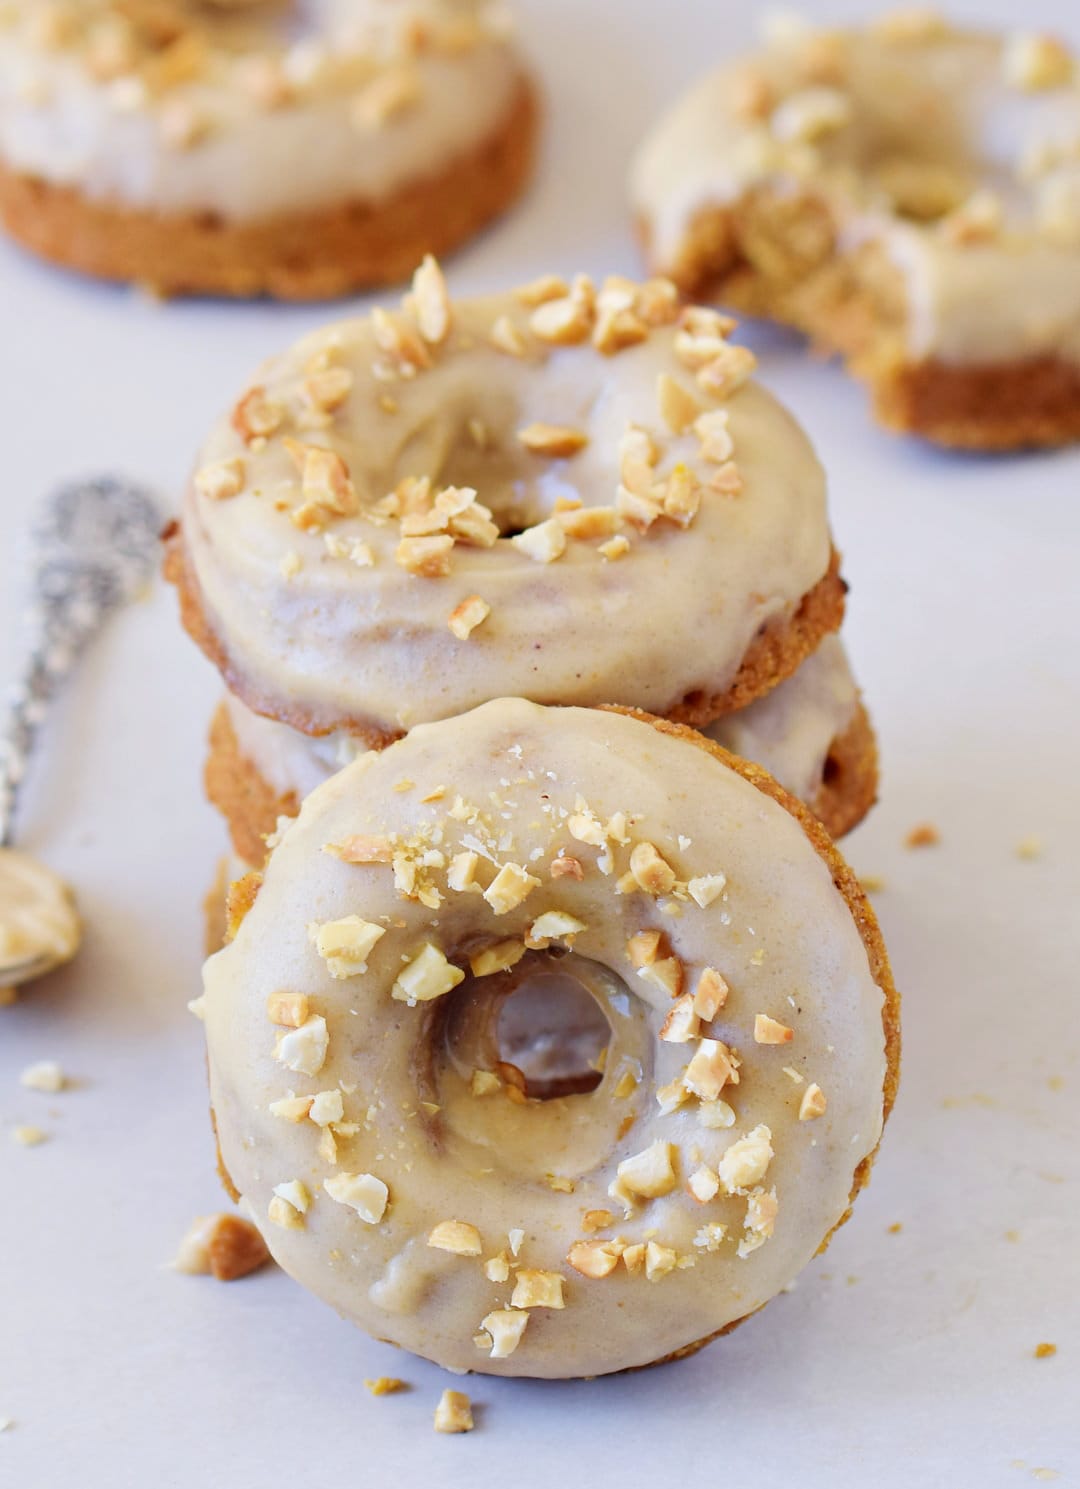 healthy vegan carrot cake donuts with gingerbread flavor and frosting gluten-free